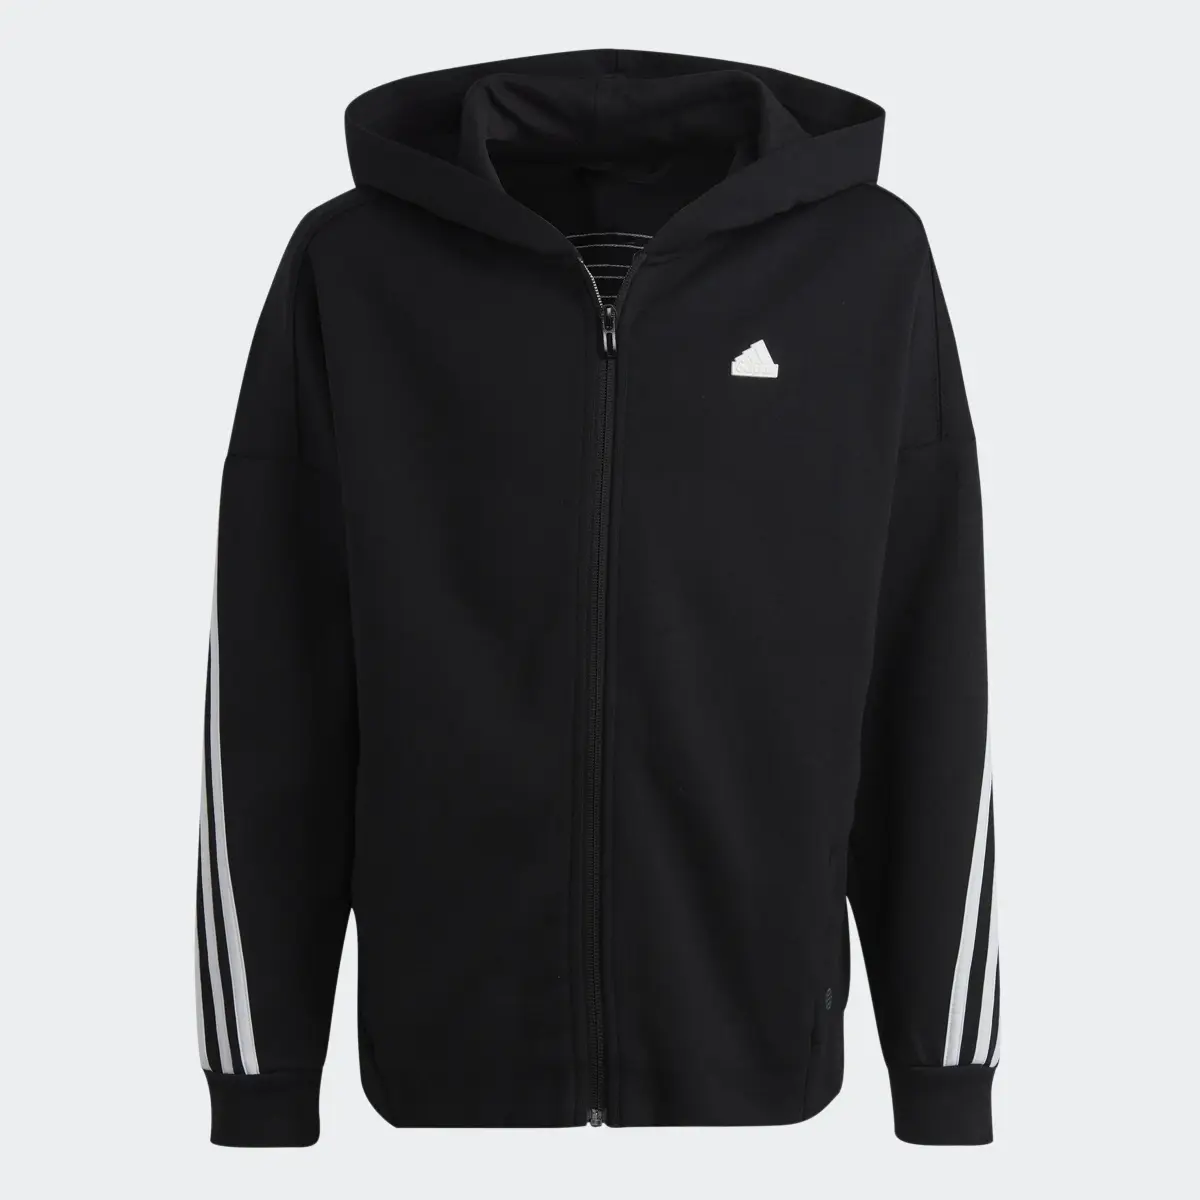 Adidas Future Icons 3-Stripes Full-Zip Hooded Track Top. 3